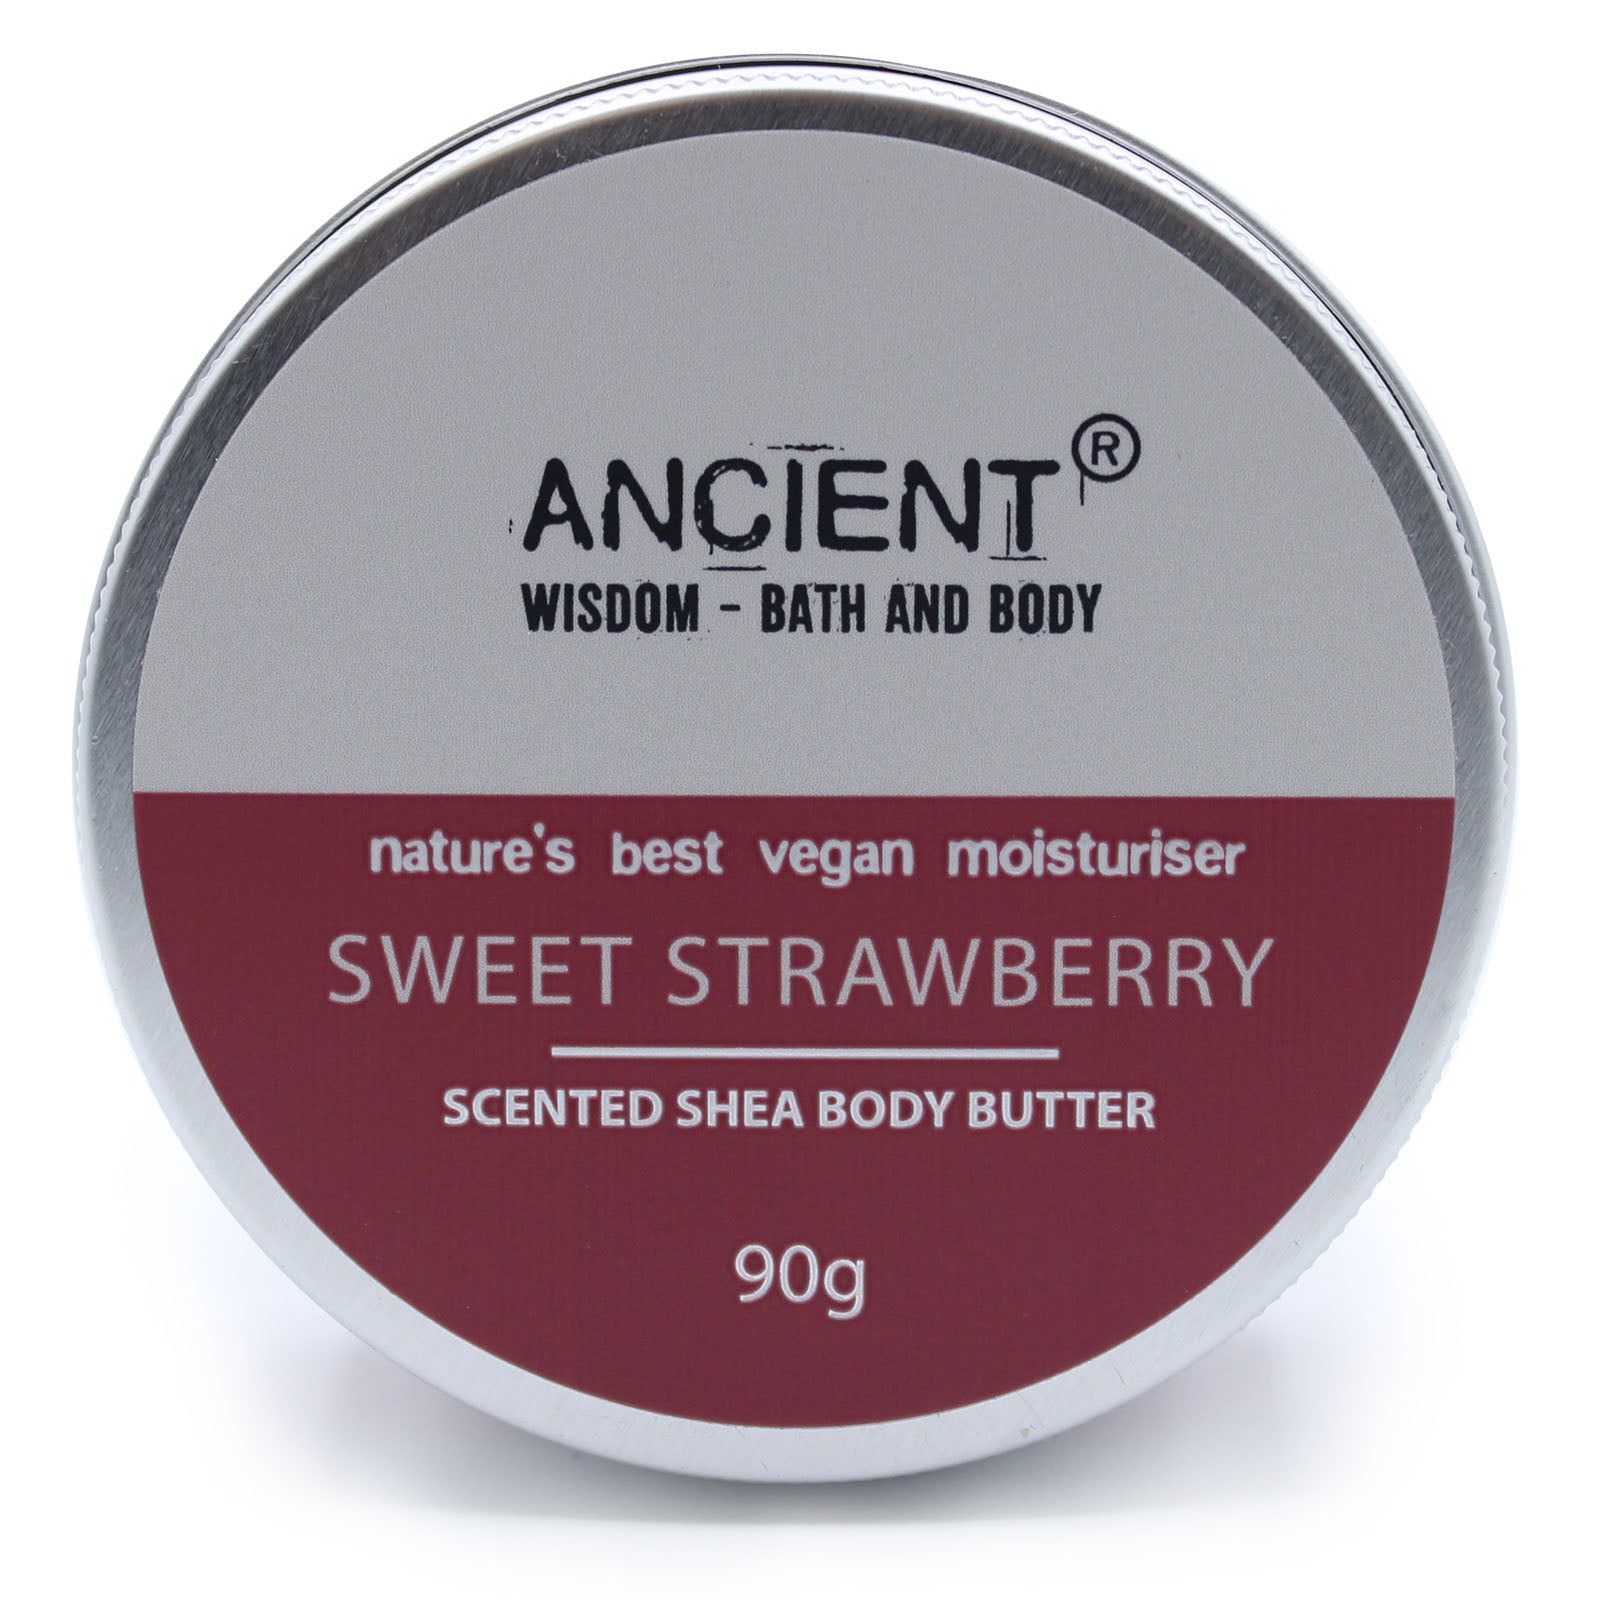 View Scented Shea Body Butter 90g Sweet Strawberry information